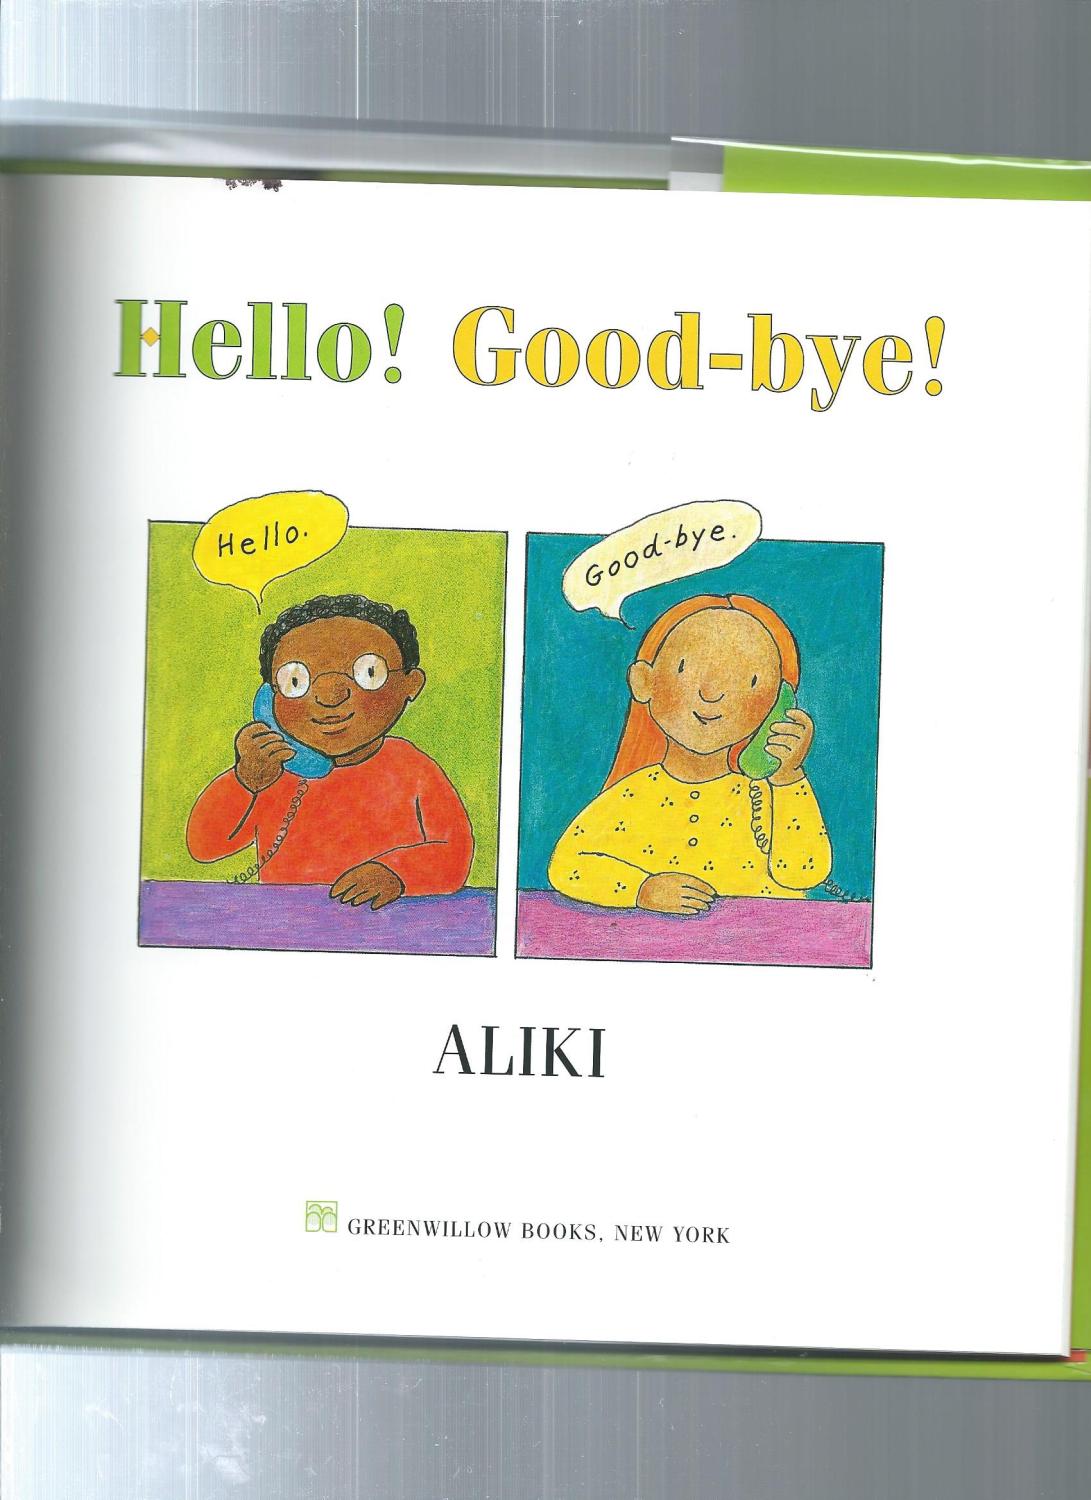 Hello Goodbye By Aliki Near Fine Hardcover 1996 1st Edition Signed By Author S Odds Ends Books